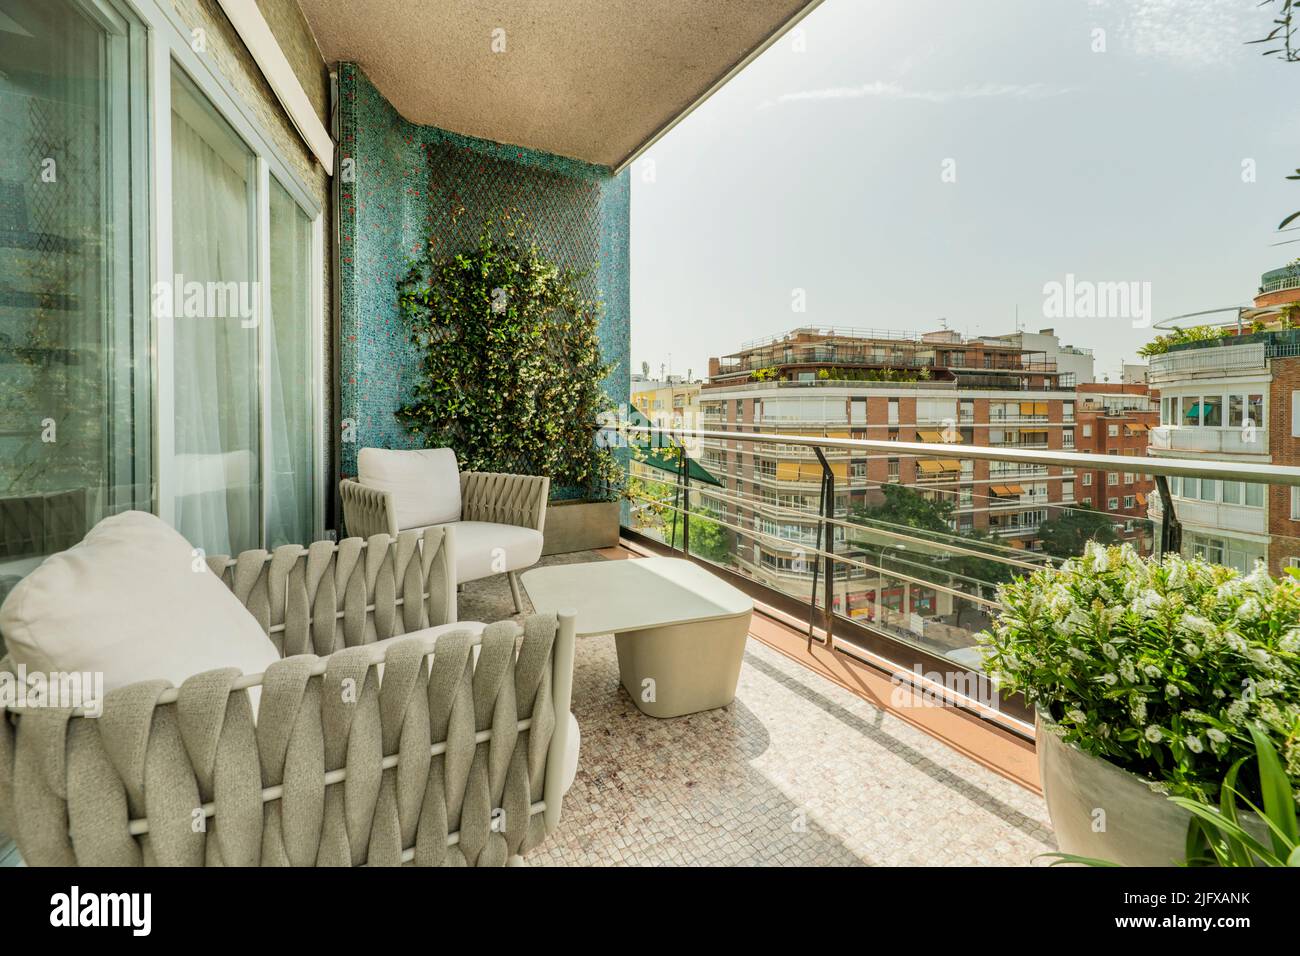 Terrace with gray fabric armchairs, metal railing, planter, vertical garden on a blue wall and views of the city Stock Photo